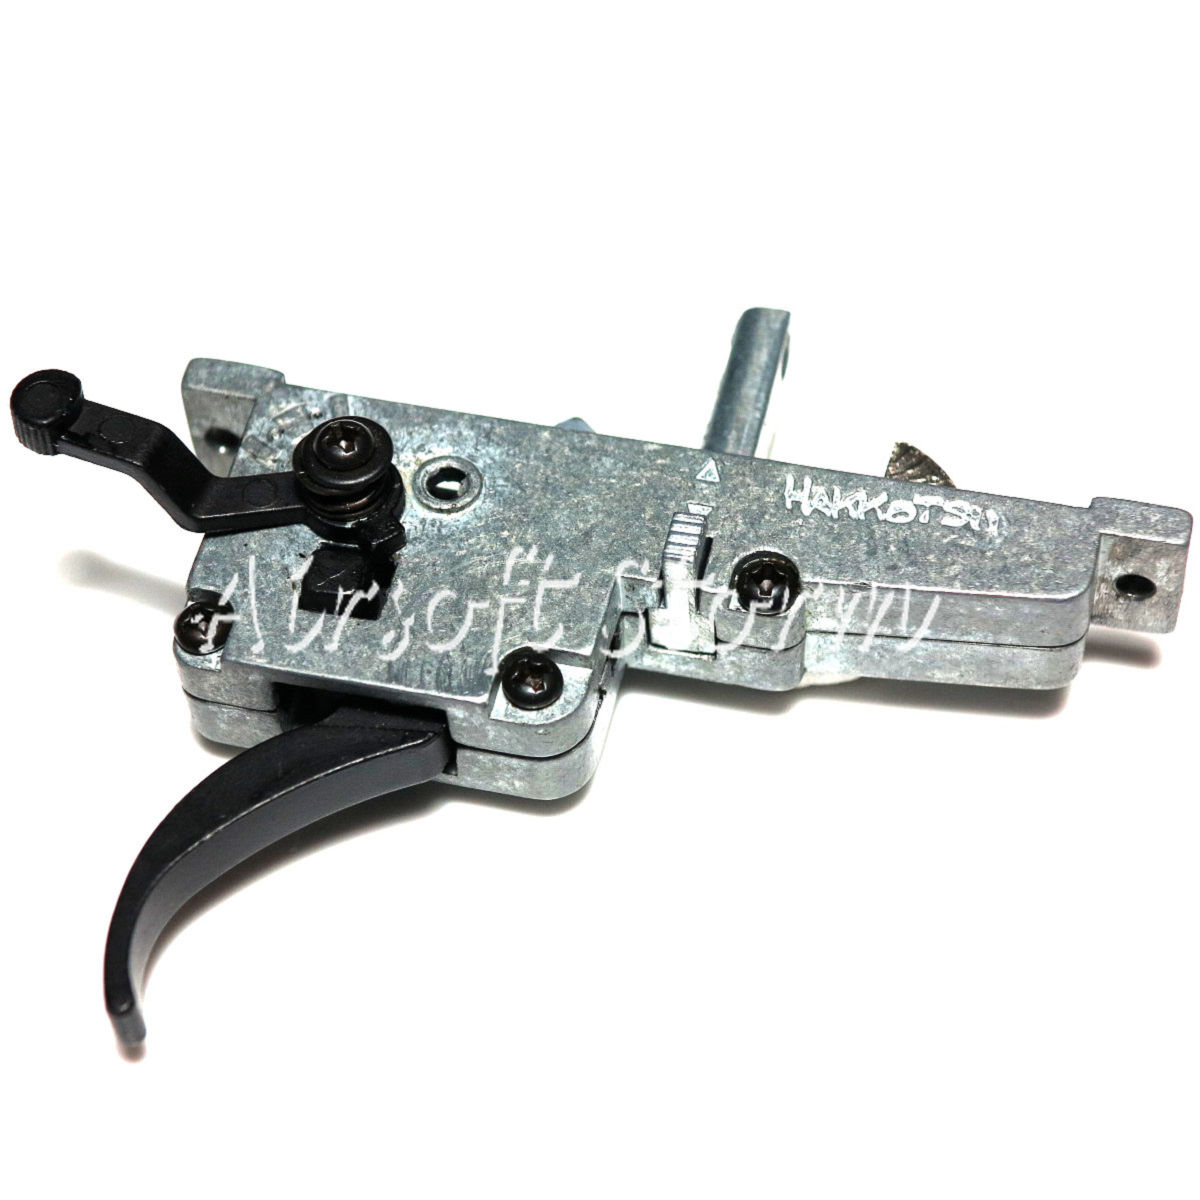 AEG Gear Hakkotsu Trigger Assembly for APS APM40 Airsoft Sniper Rifle - Click Image to Close